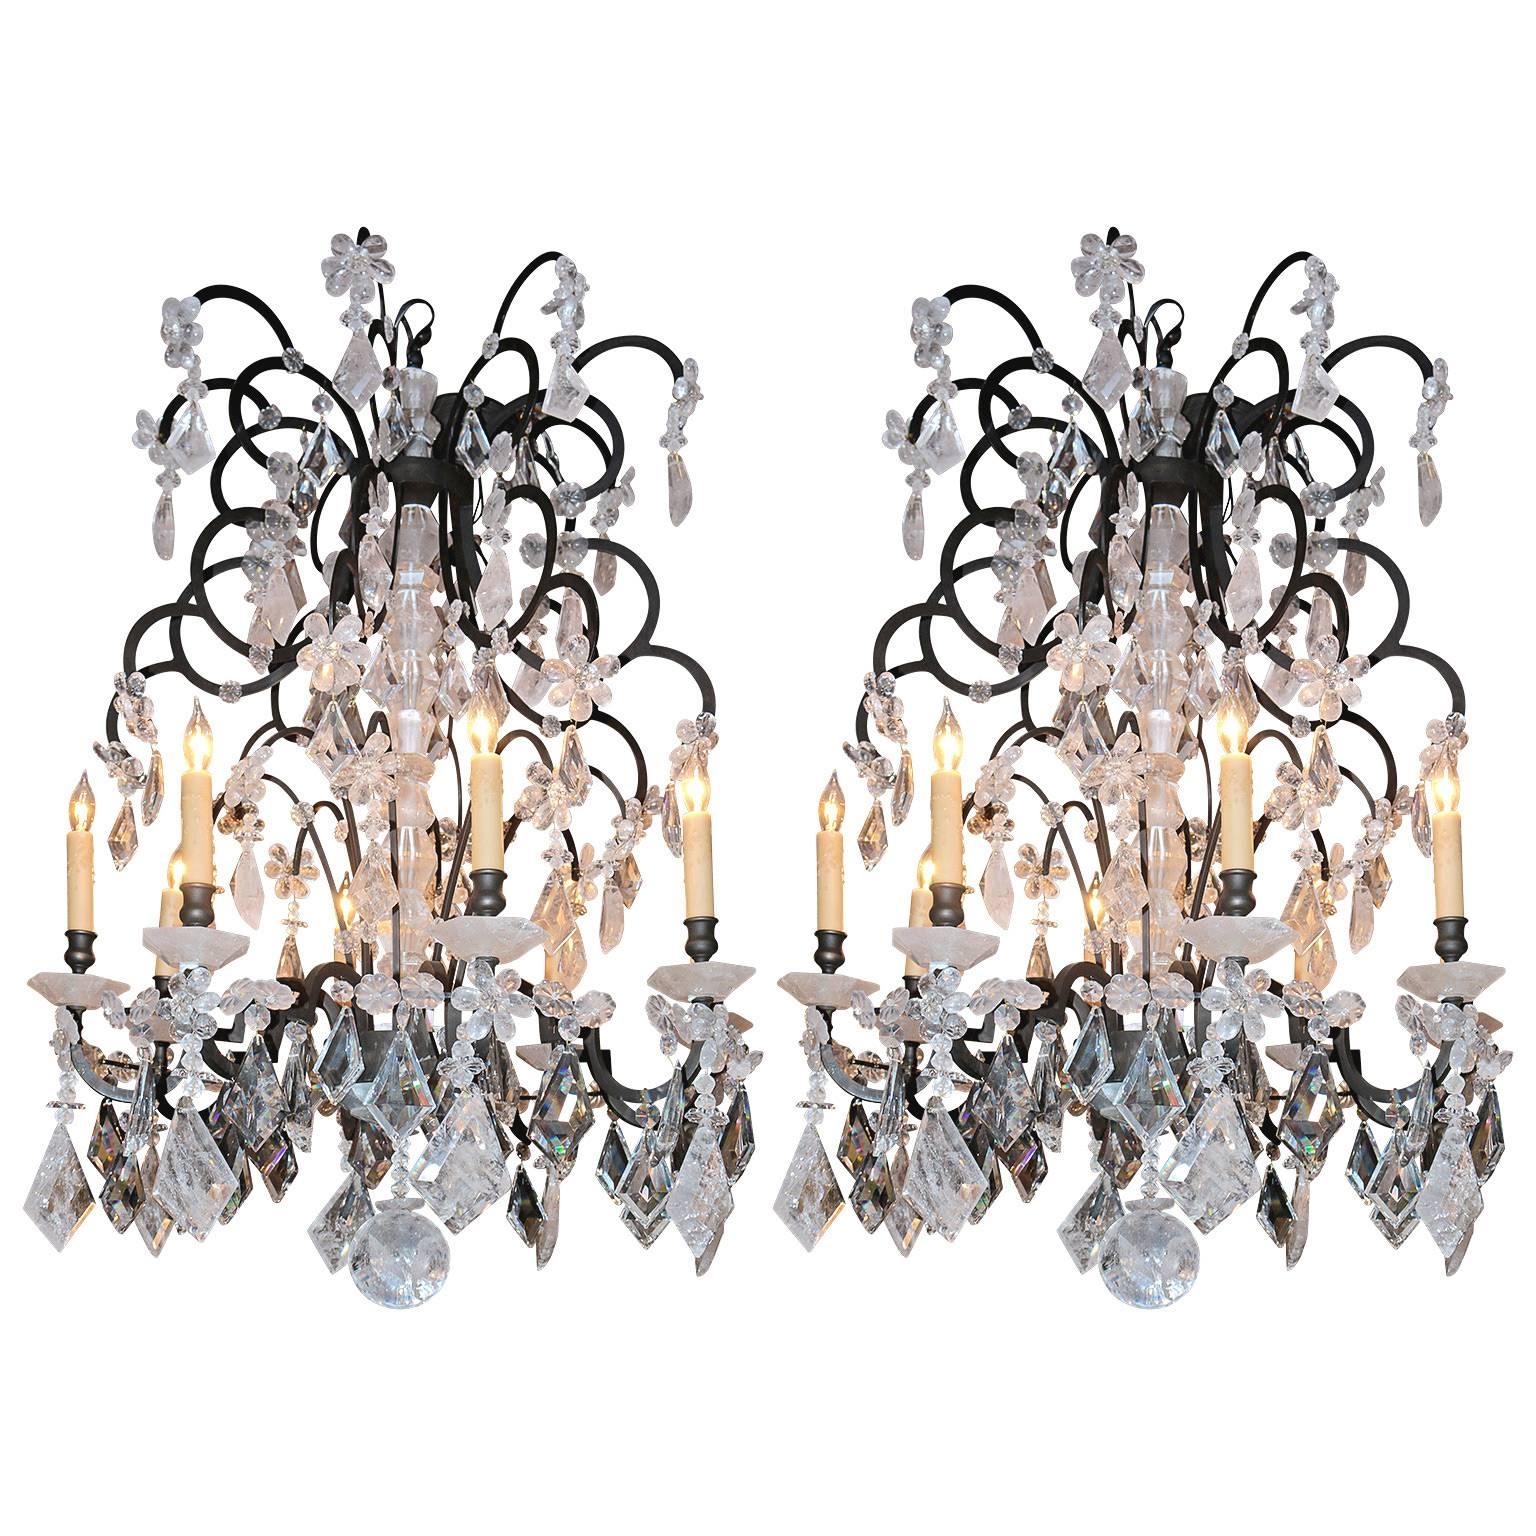 Pair of Modern Rock Crystal Chandliers For Sale